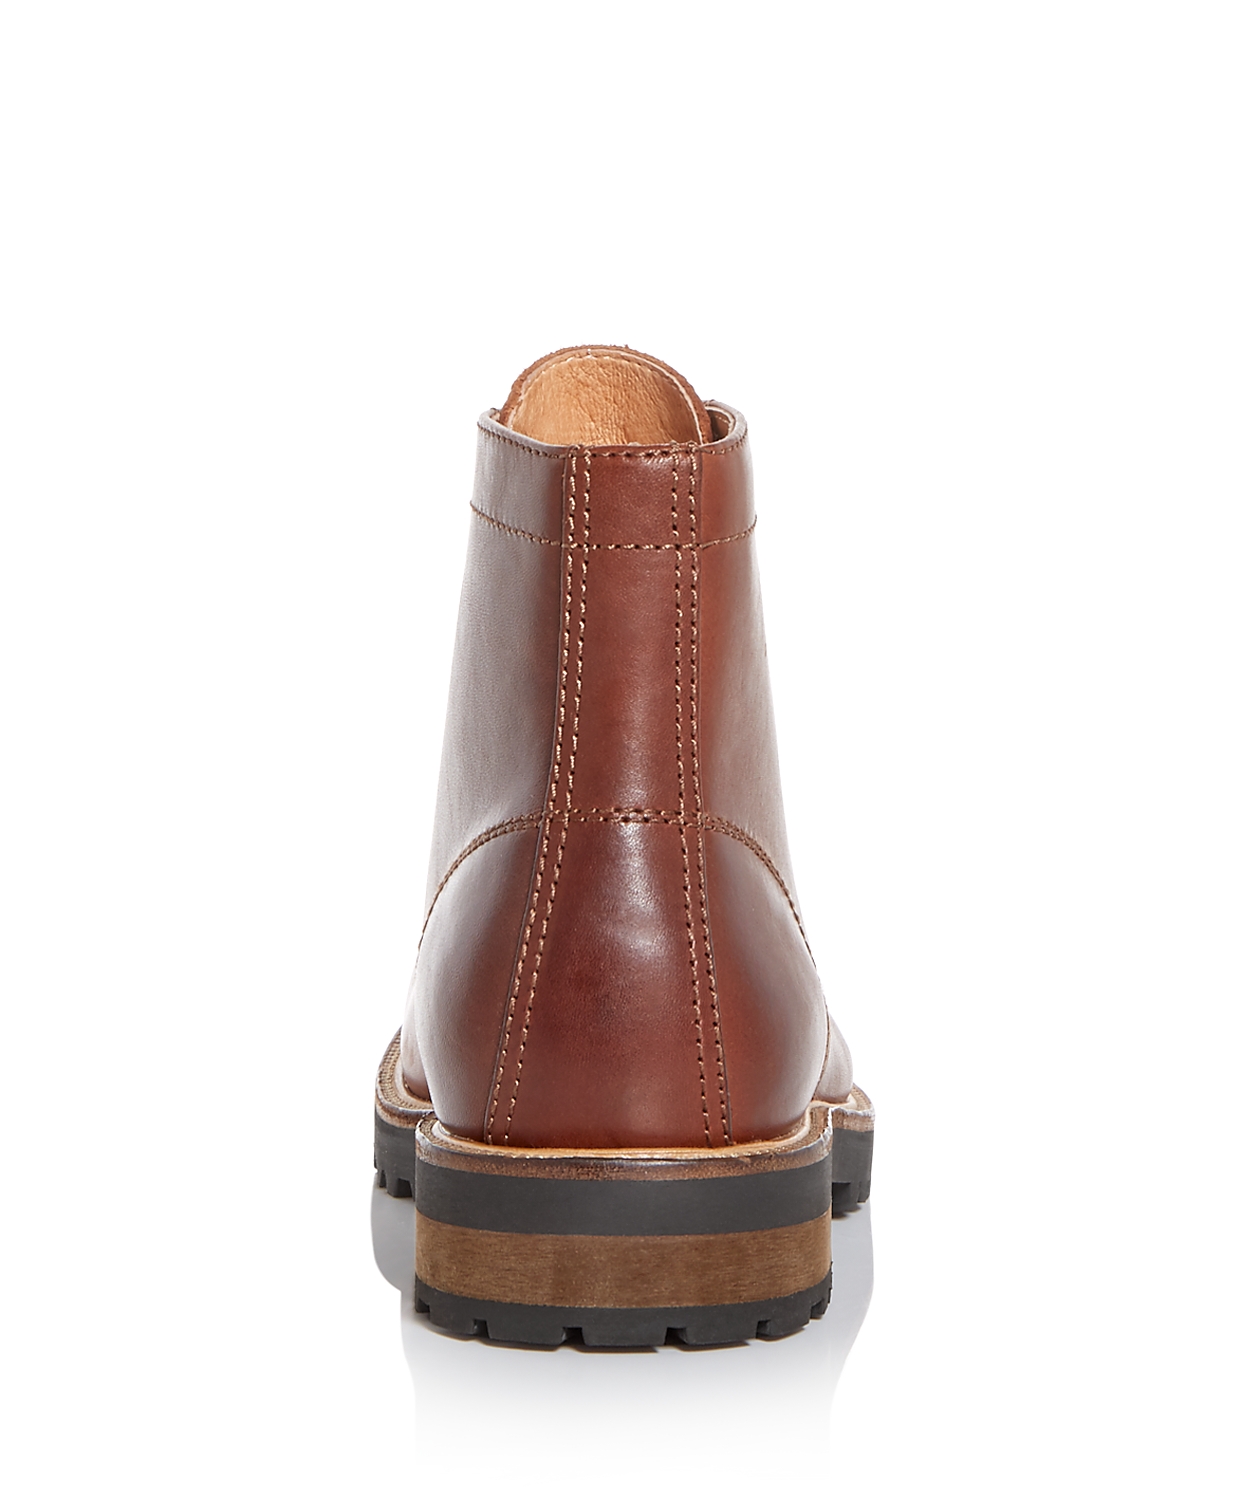 woocommerce-673321-2209615.cloudwaysapps.com-the-mens-store-mens-brown-leather-pierce-lug-sole-boots